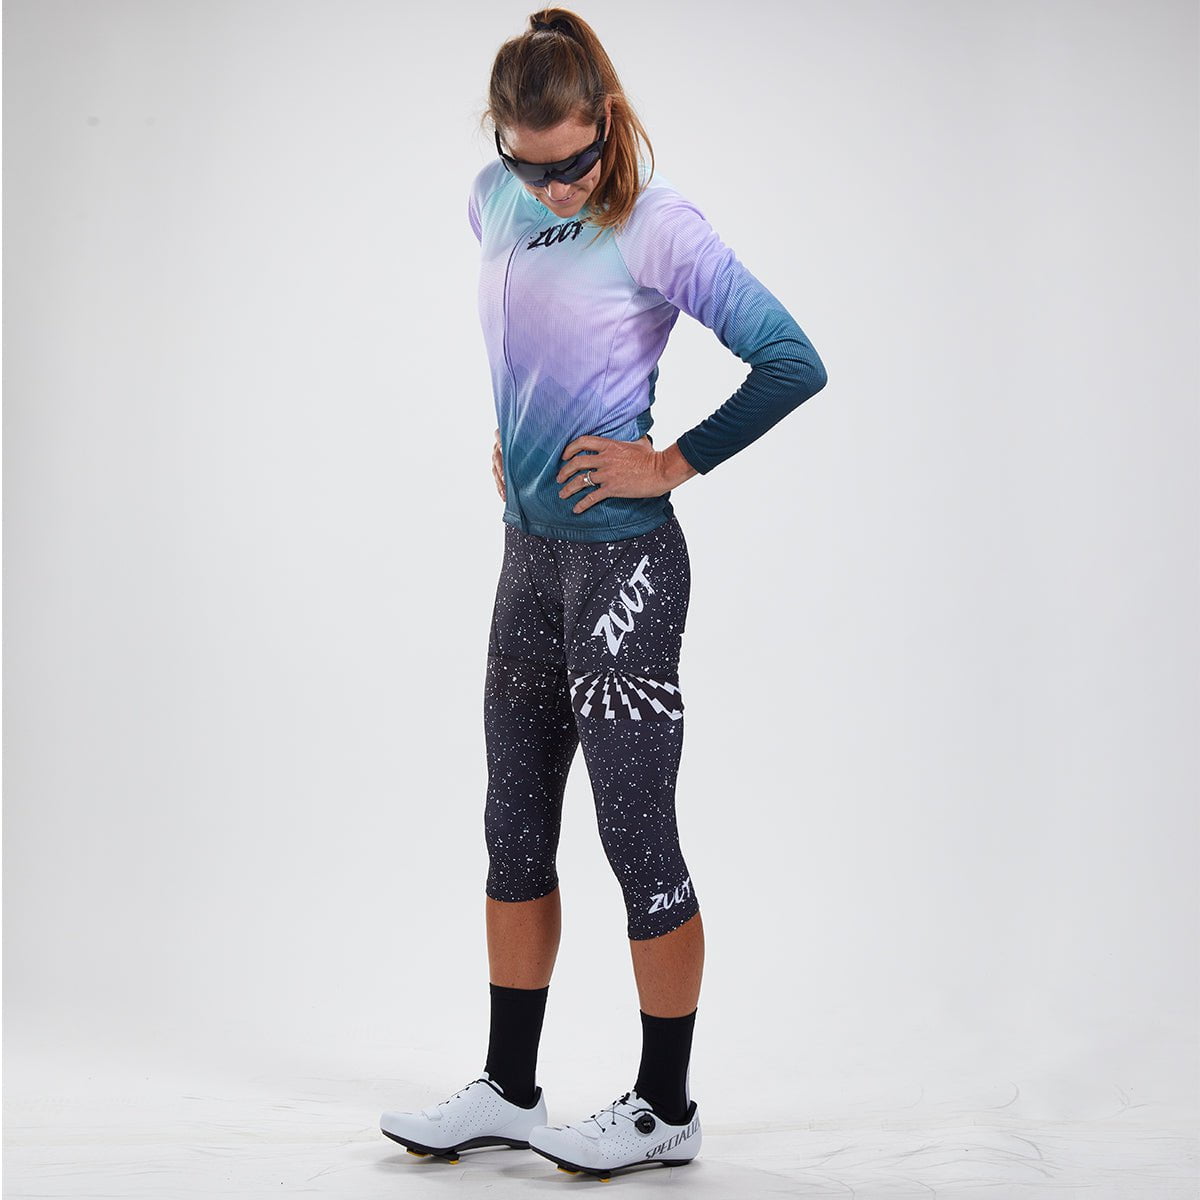 Zoot Sports CYCLE TOPS WOMENS LTD CYCLE THERMO JERSEY - KONA ICE